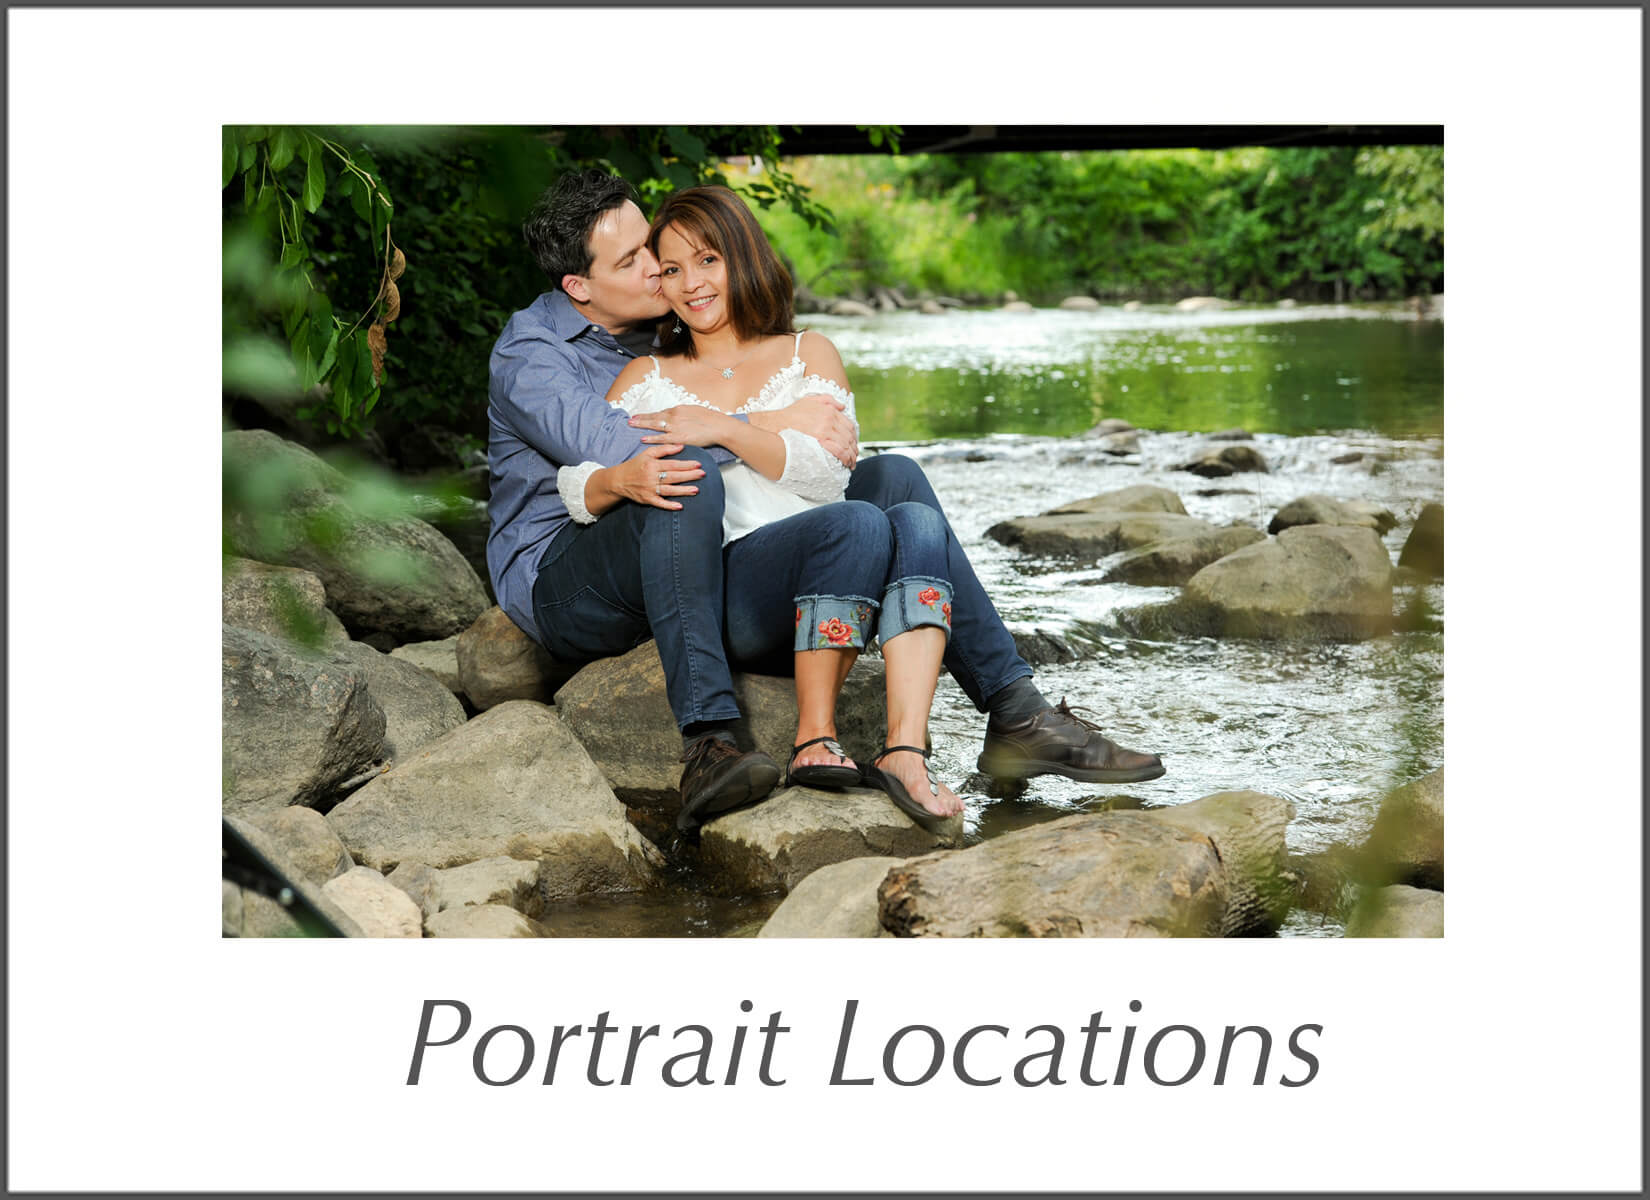 A menu to all the locations Marci Curtis Wedding Photojournalist uses for her on location portrait photography sessions